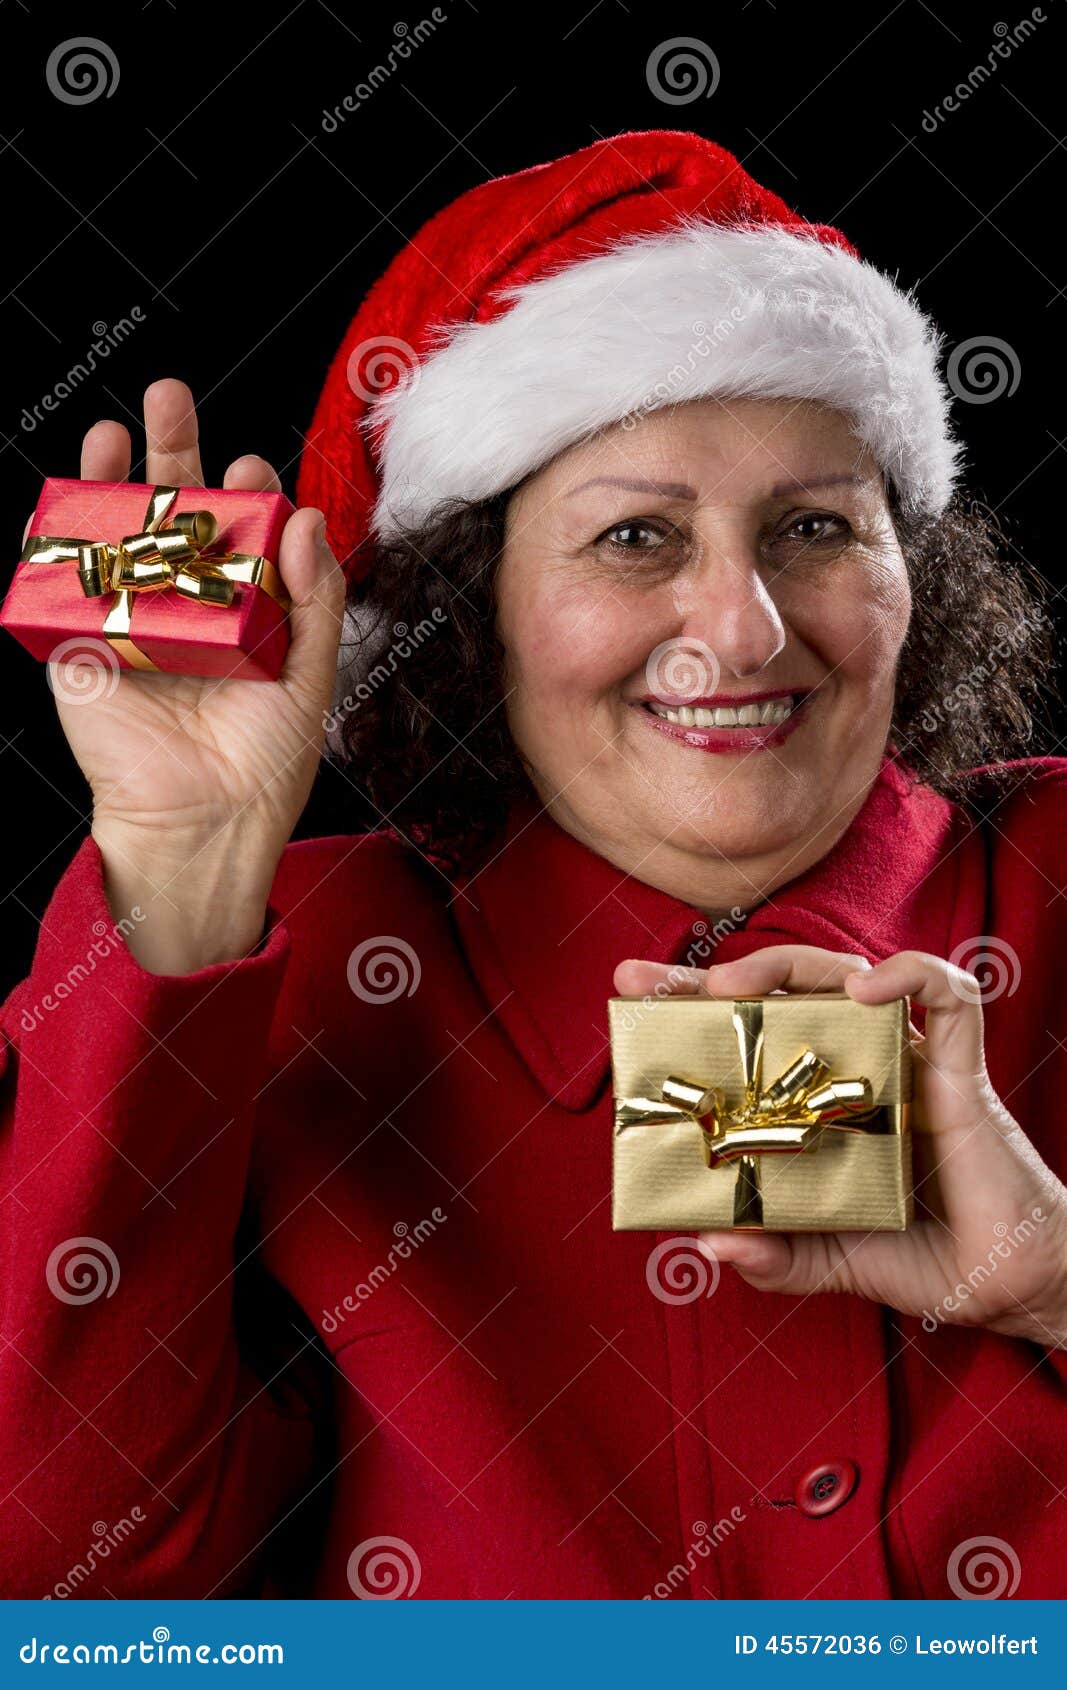 https://thumbs.dreamstime.com/z/happy-old-woman-santa-hat-two-xmas-gifts-smiling-elderly-lady-red-coat-claus-showing-small-wrapped-christmas-presents-45572036.jpg